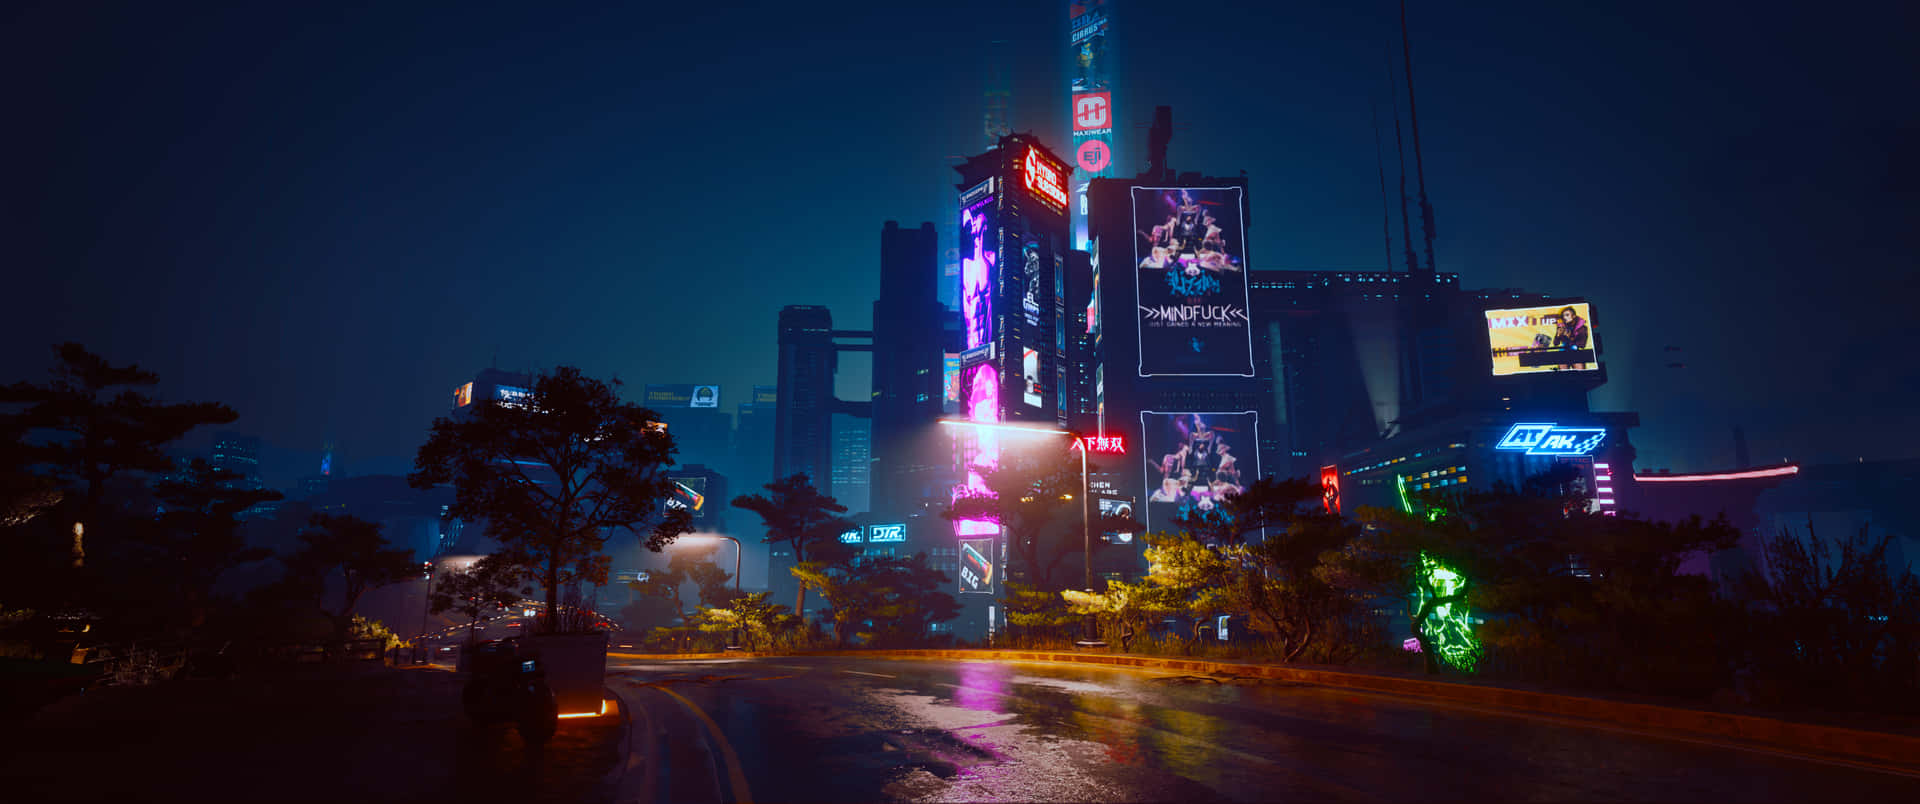 Cityscape filled with neon lights Wallpaper